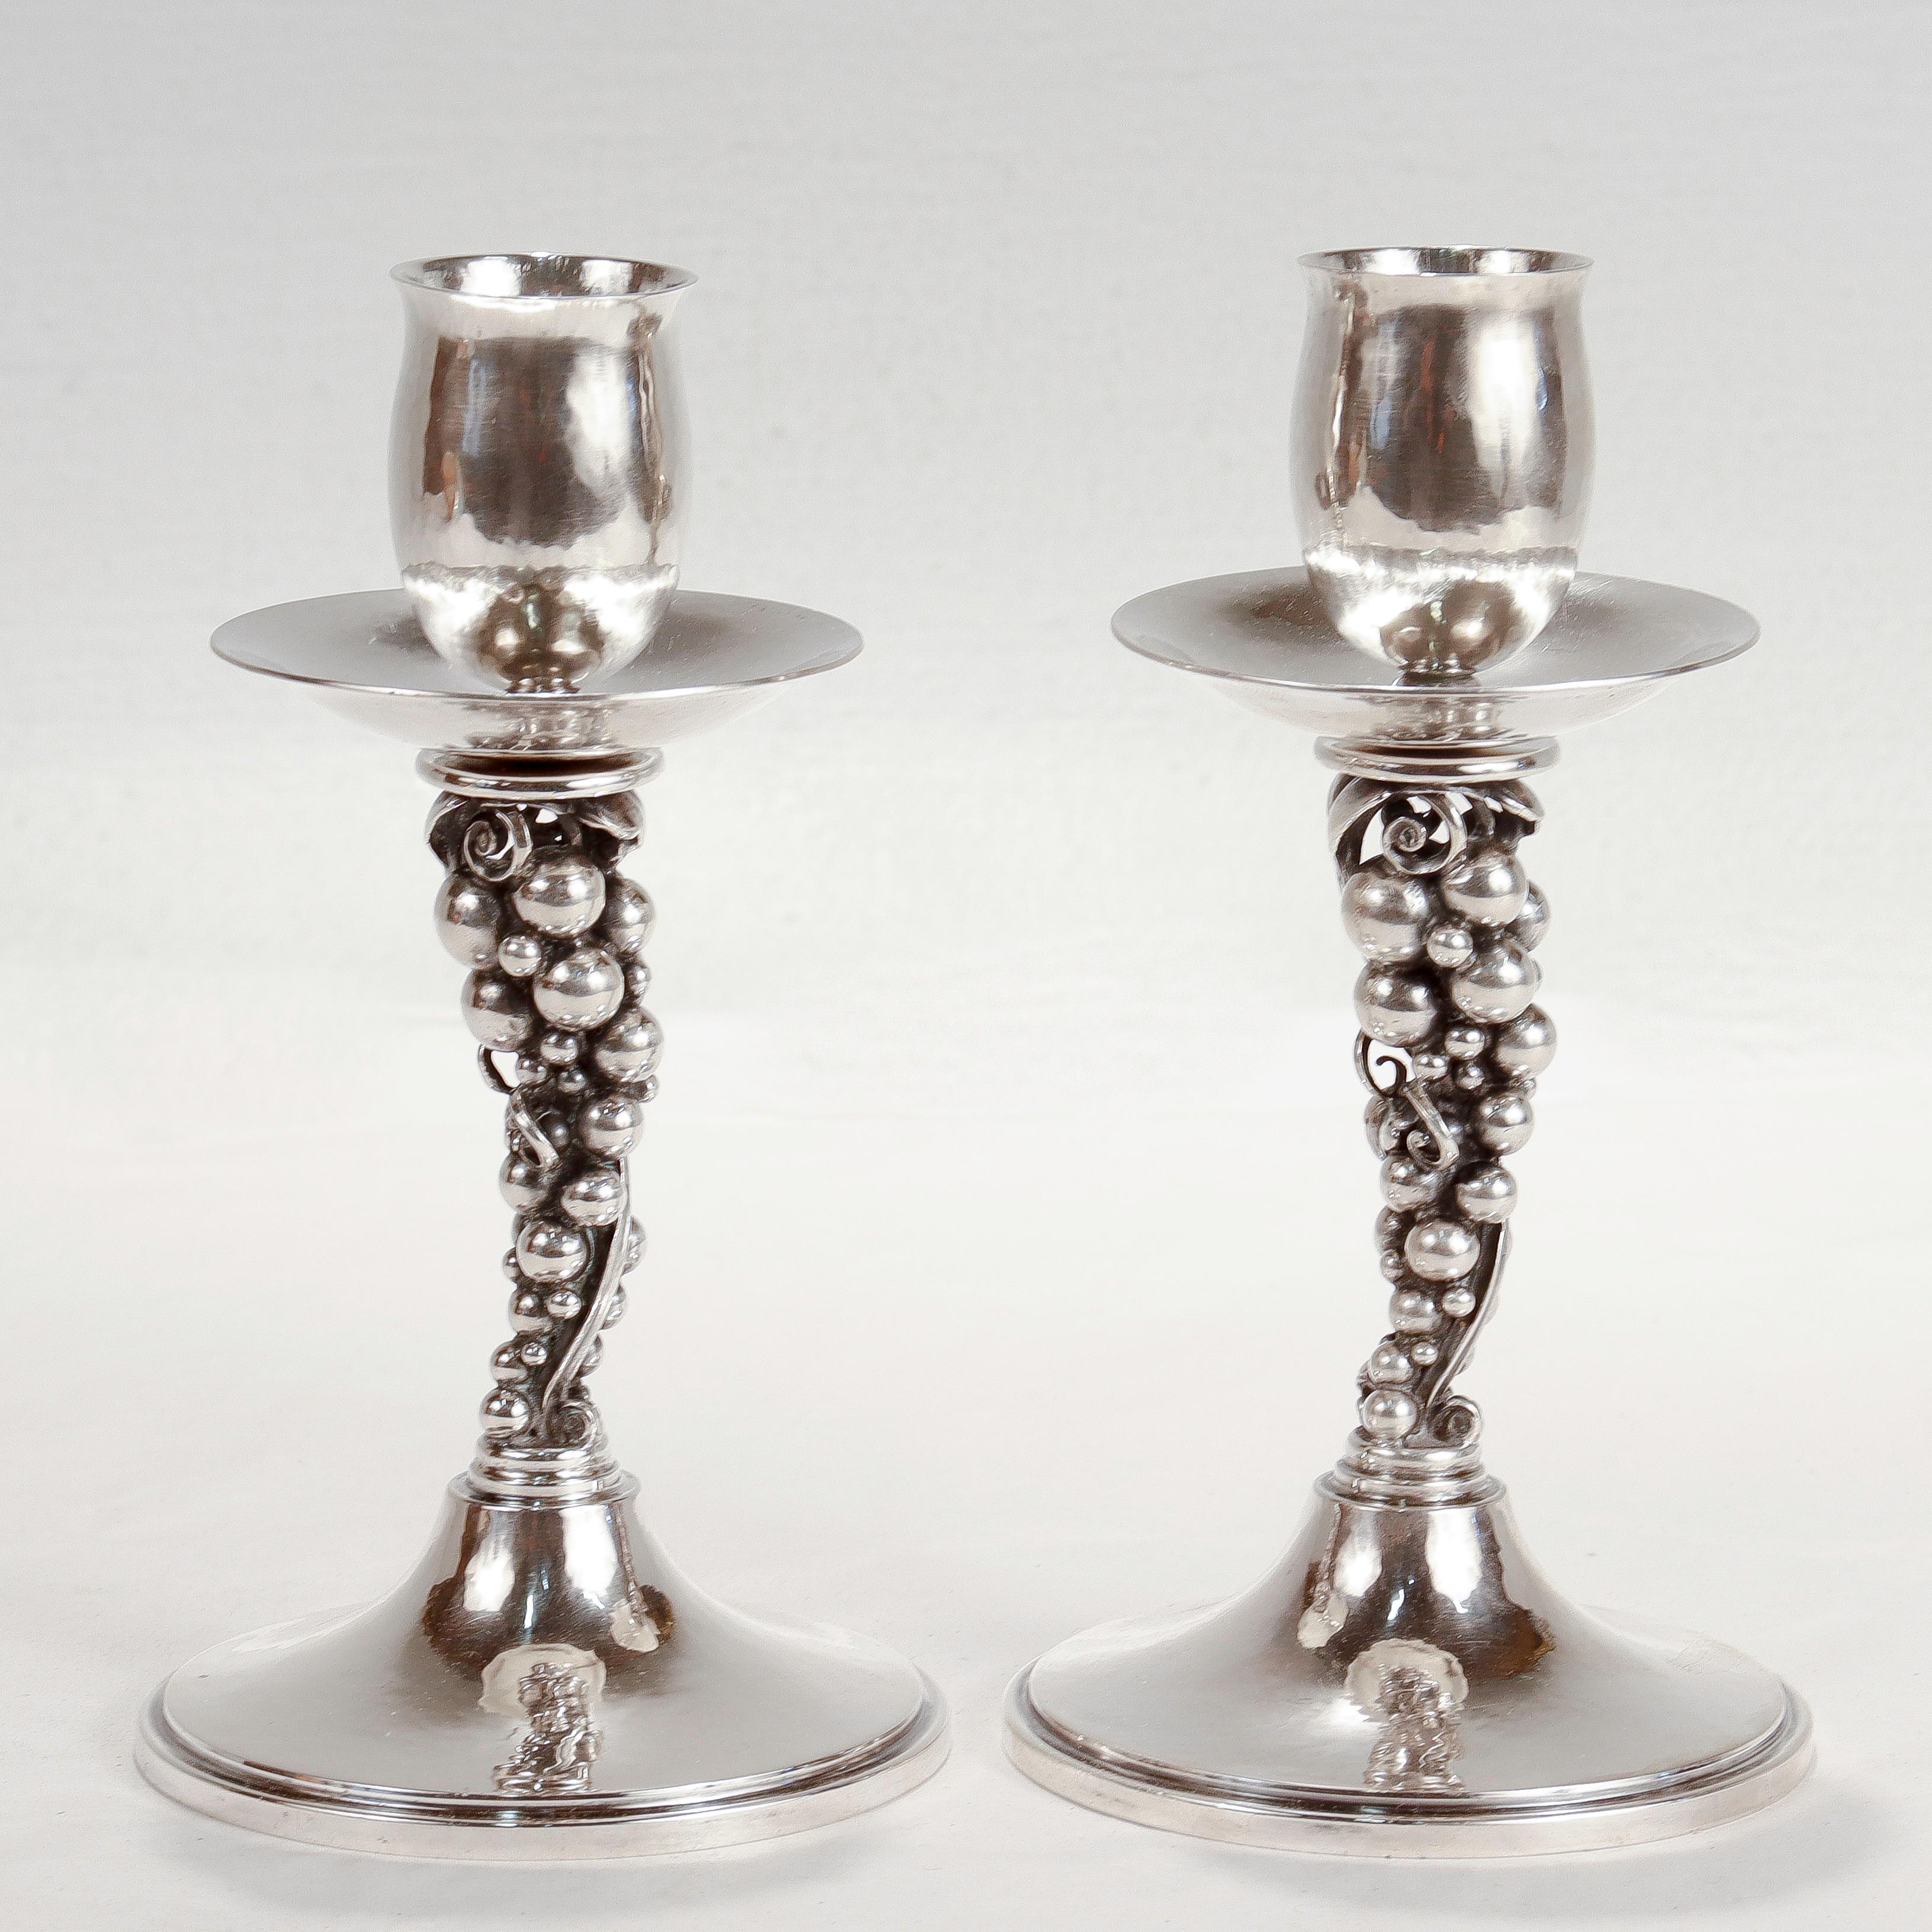 A fine pair of Danish Modern sterling silver candlesticks.

By Aage Weimar of Copenhagen, Denmark (active 1937 - 1966).

In the Jensen style.

With grape cluster pedestals on hand hammered bases supporting tulip shaped candlecups & hand hammered